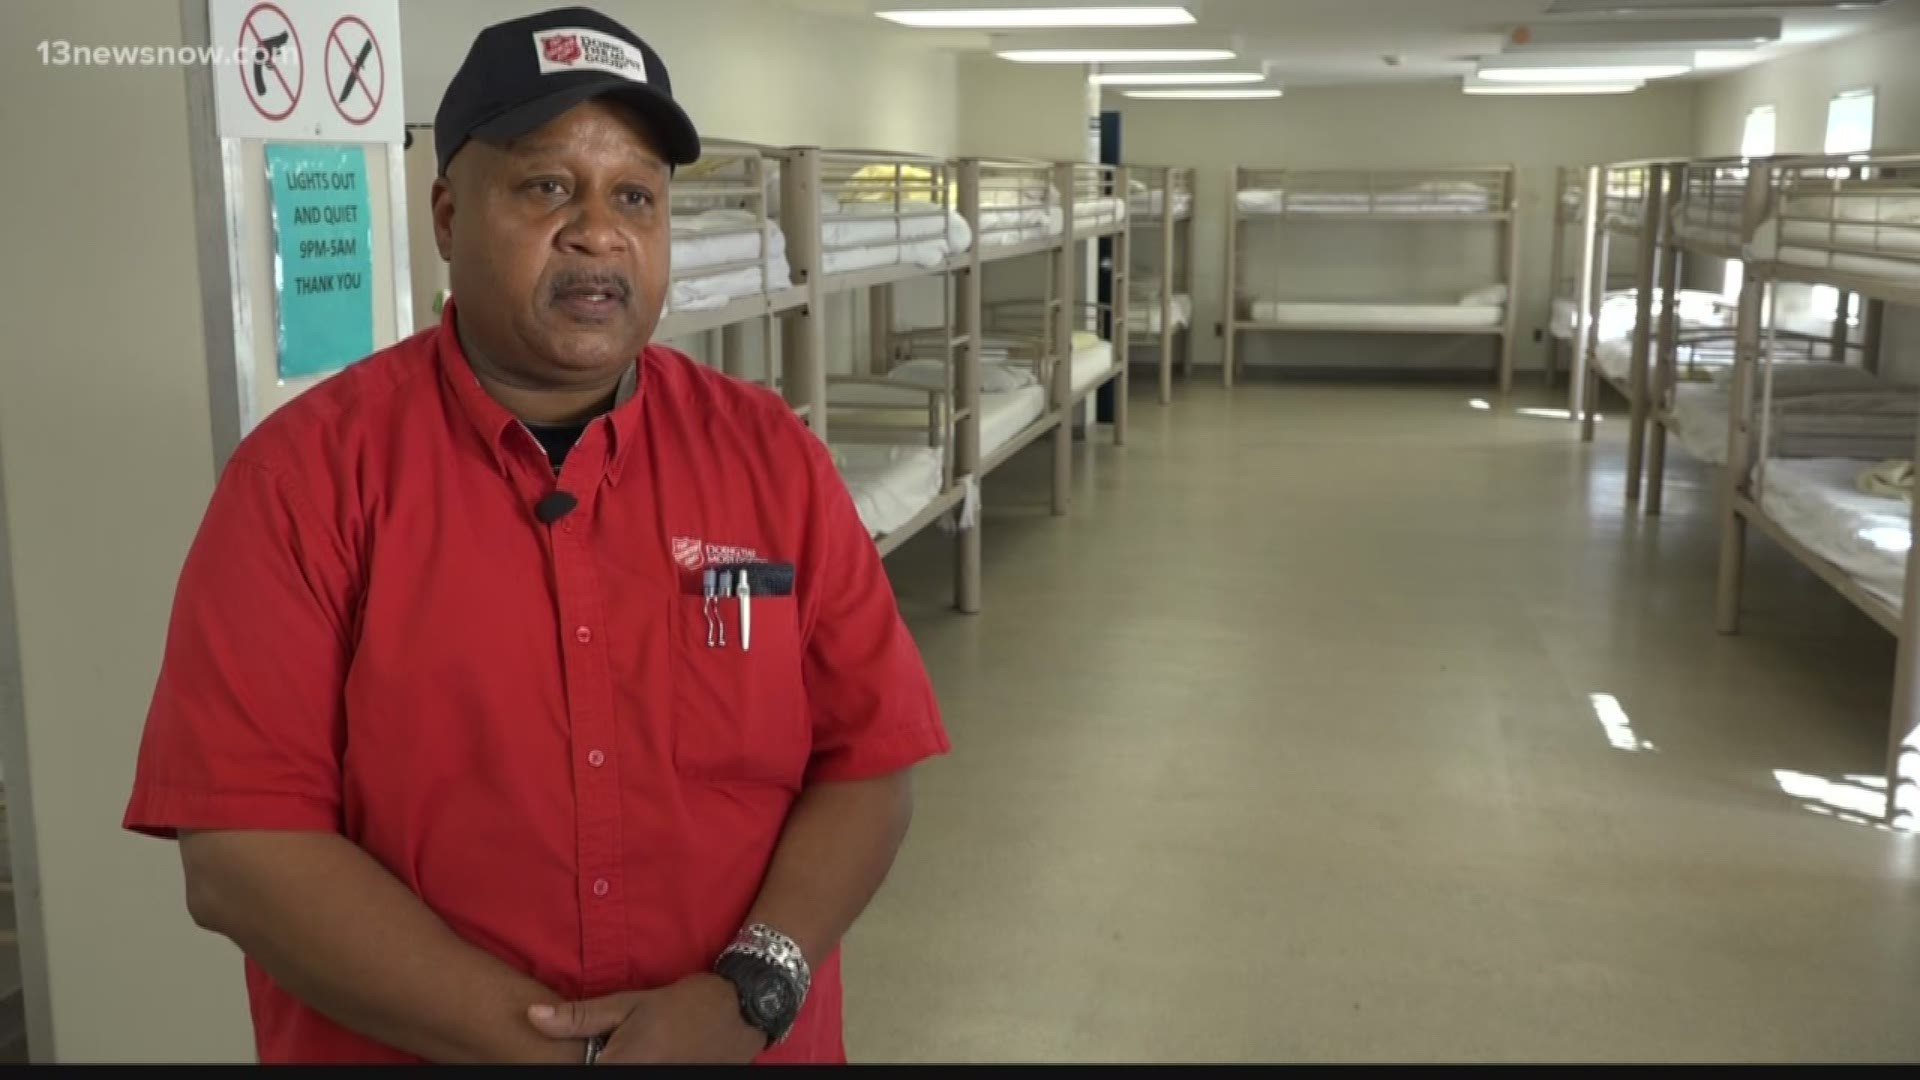 After turning his life around, A.C. decided to help others do the same at the Salvation Army Emergency Men's Shelter in Norfolk.